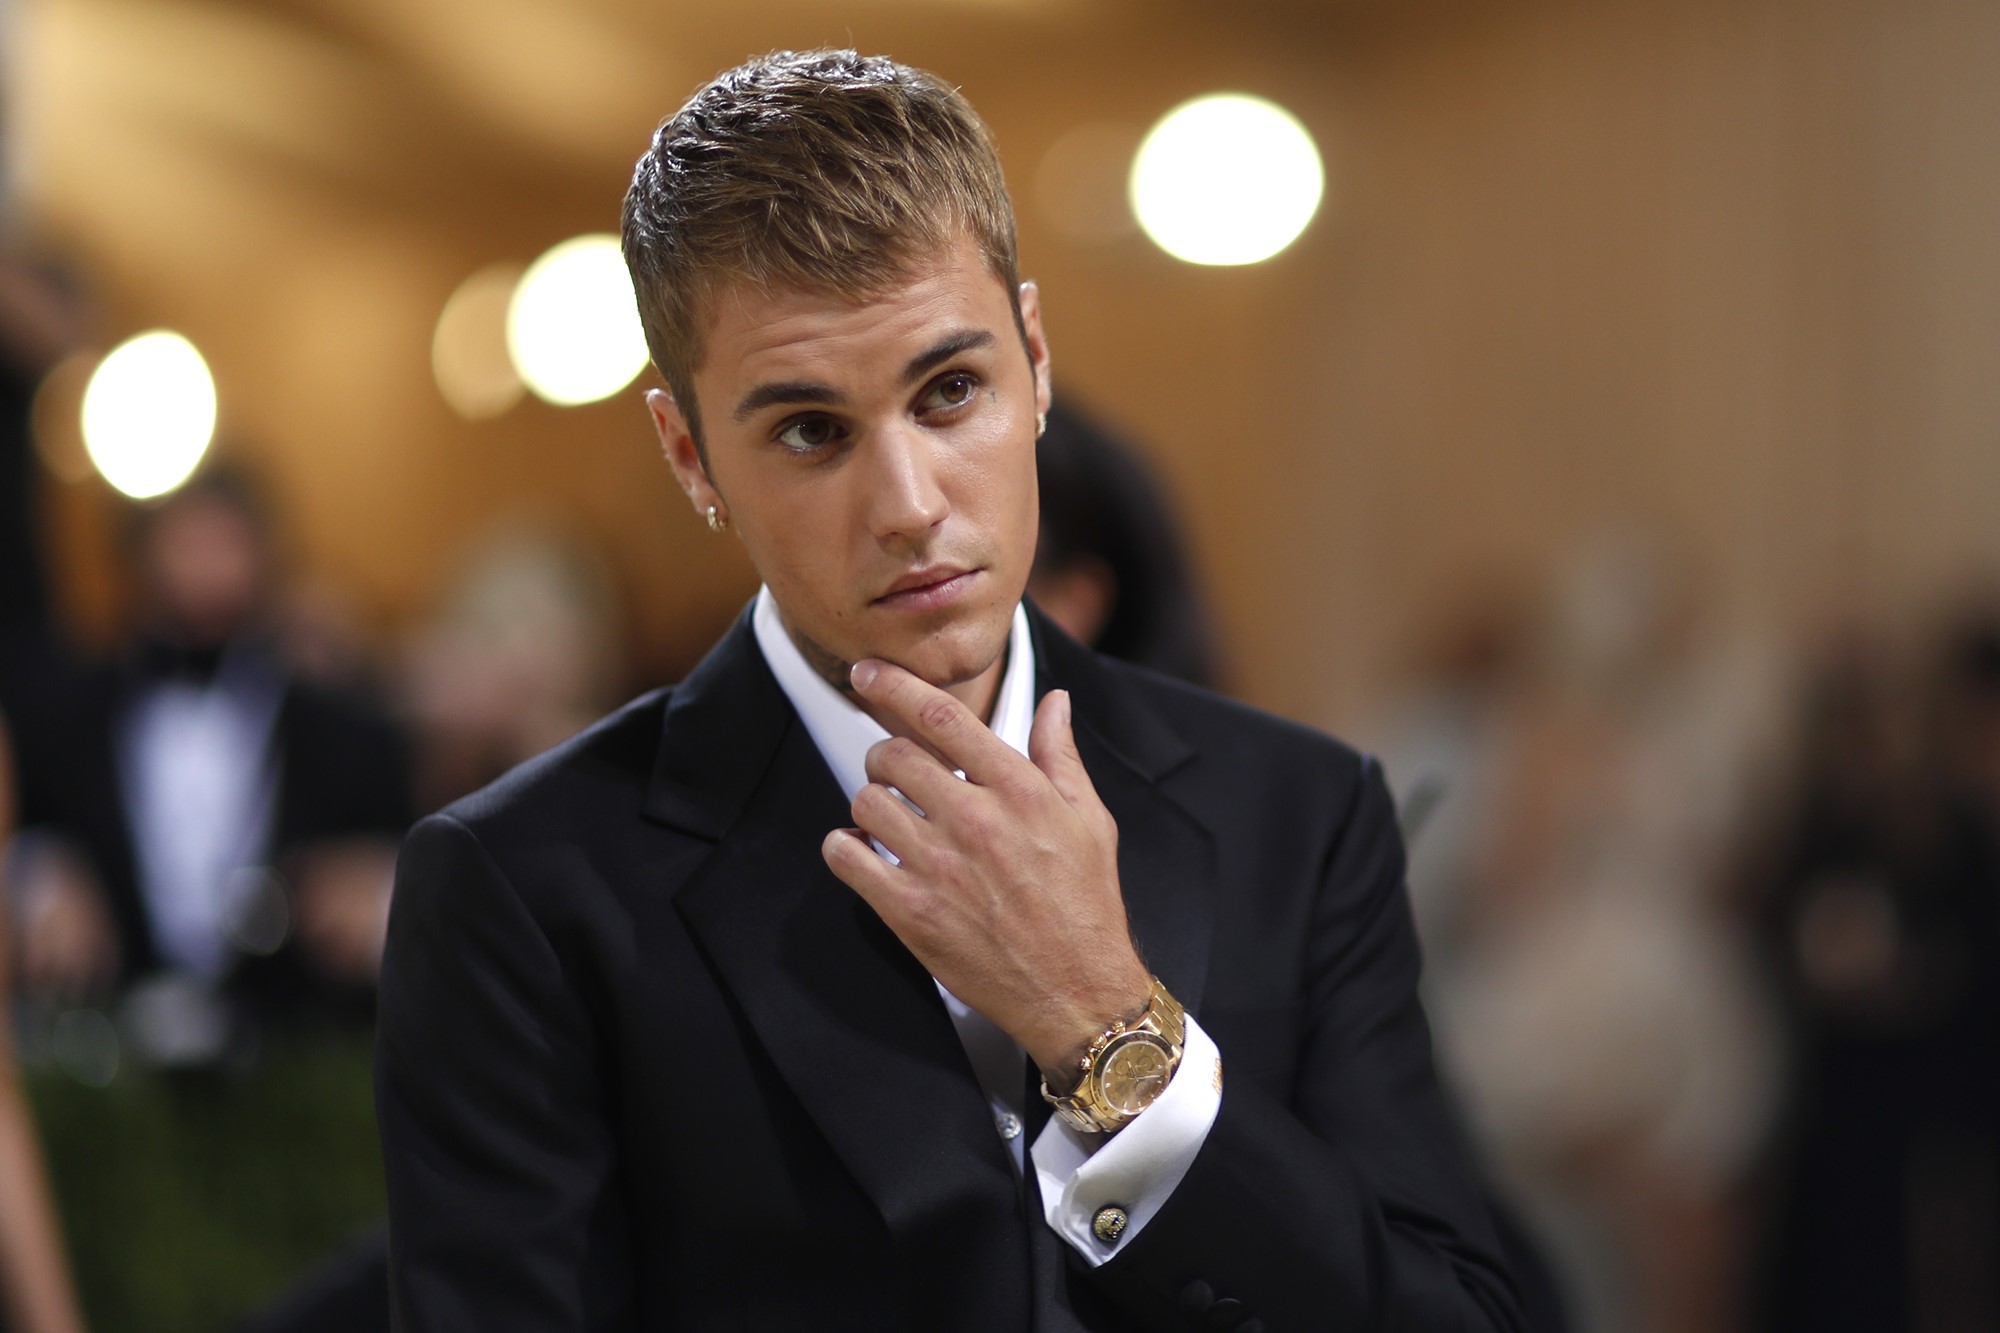 Justin poses at an event in a black suit.